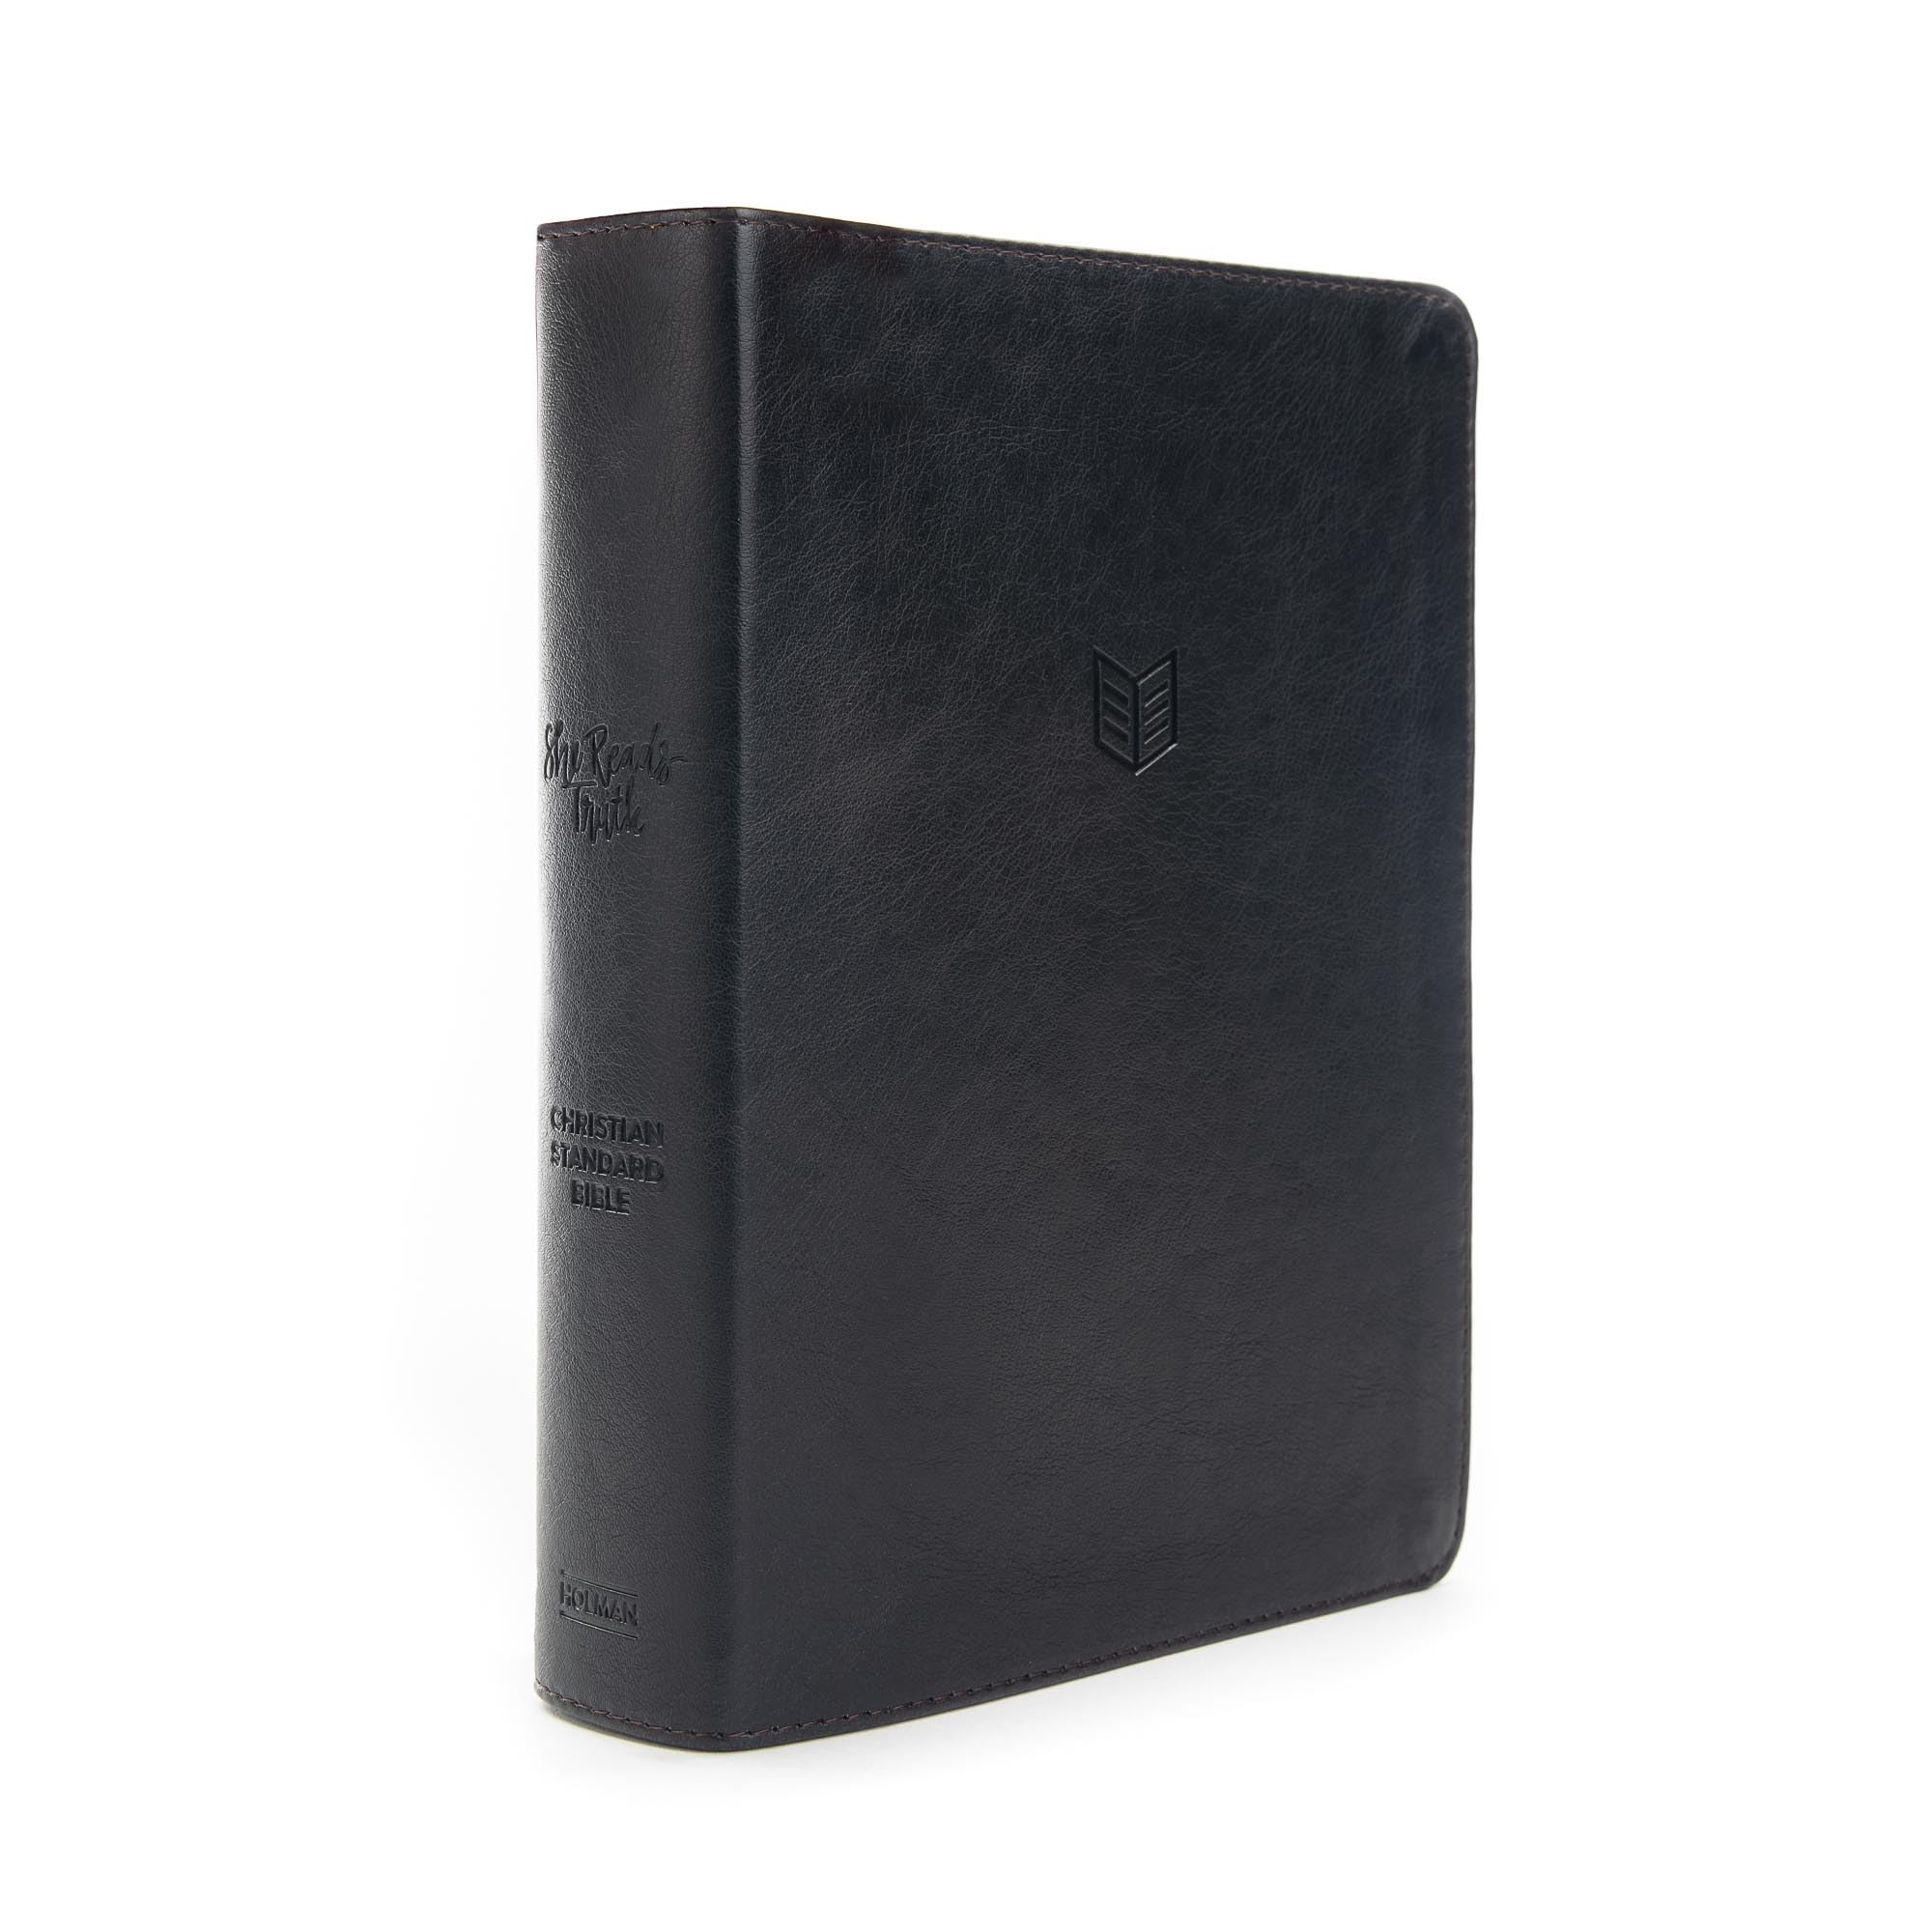 CSB She Reads Truth Bible, Black LeatherTouch, Black Letter, Full-Color Design, Wide Margins, Journaling Space, Devotionals, Reading Plans, Single-Column, Easy-to-Read Bible Serif Type